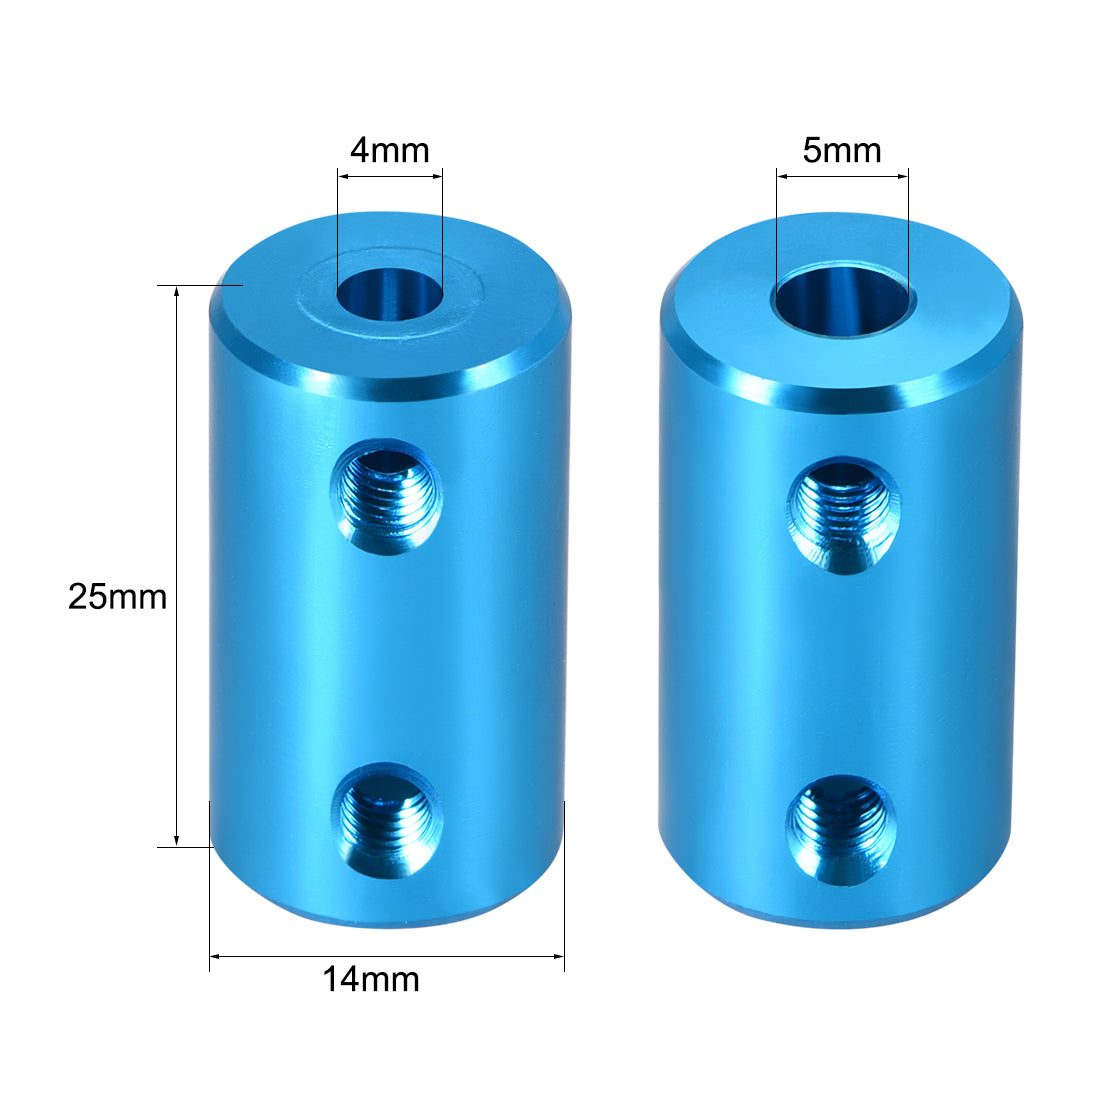 uxcell Uxcell Shaft Coupling 4mm to 5mm Bore L25xD14 Robot Motor Wheel Rigid Coupler Connector Blue 2Pcs